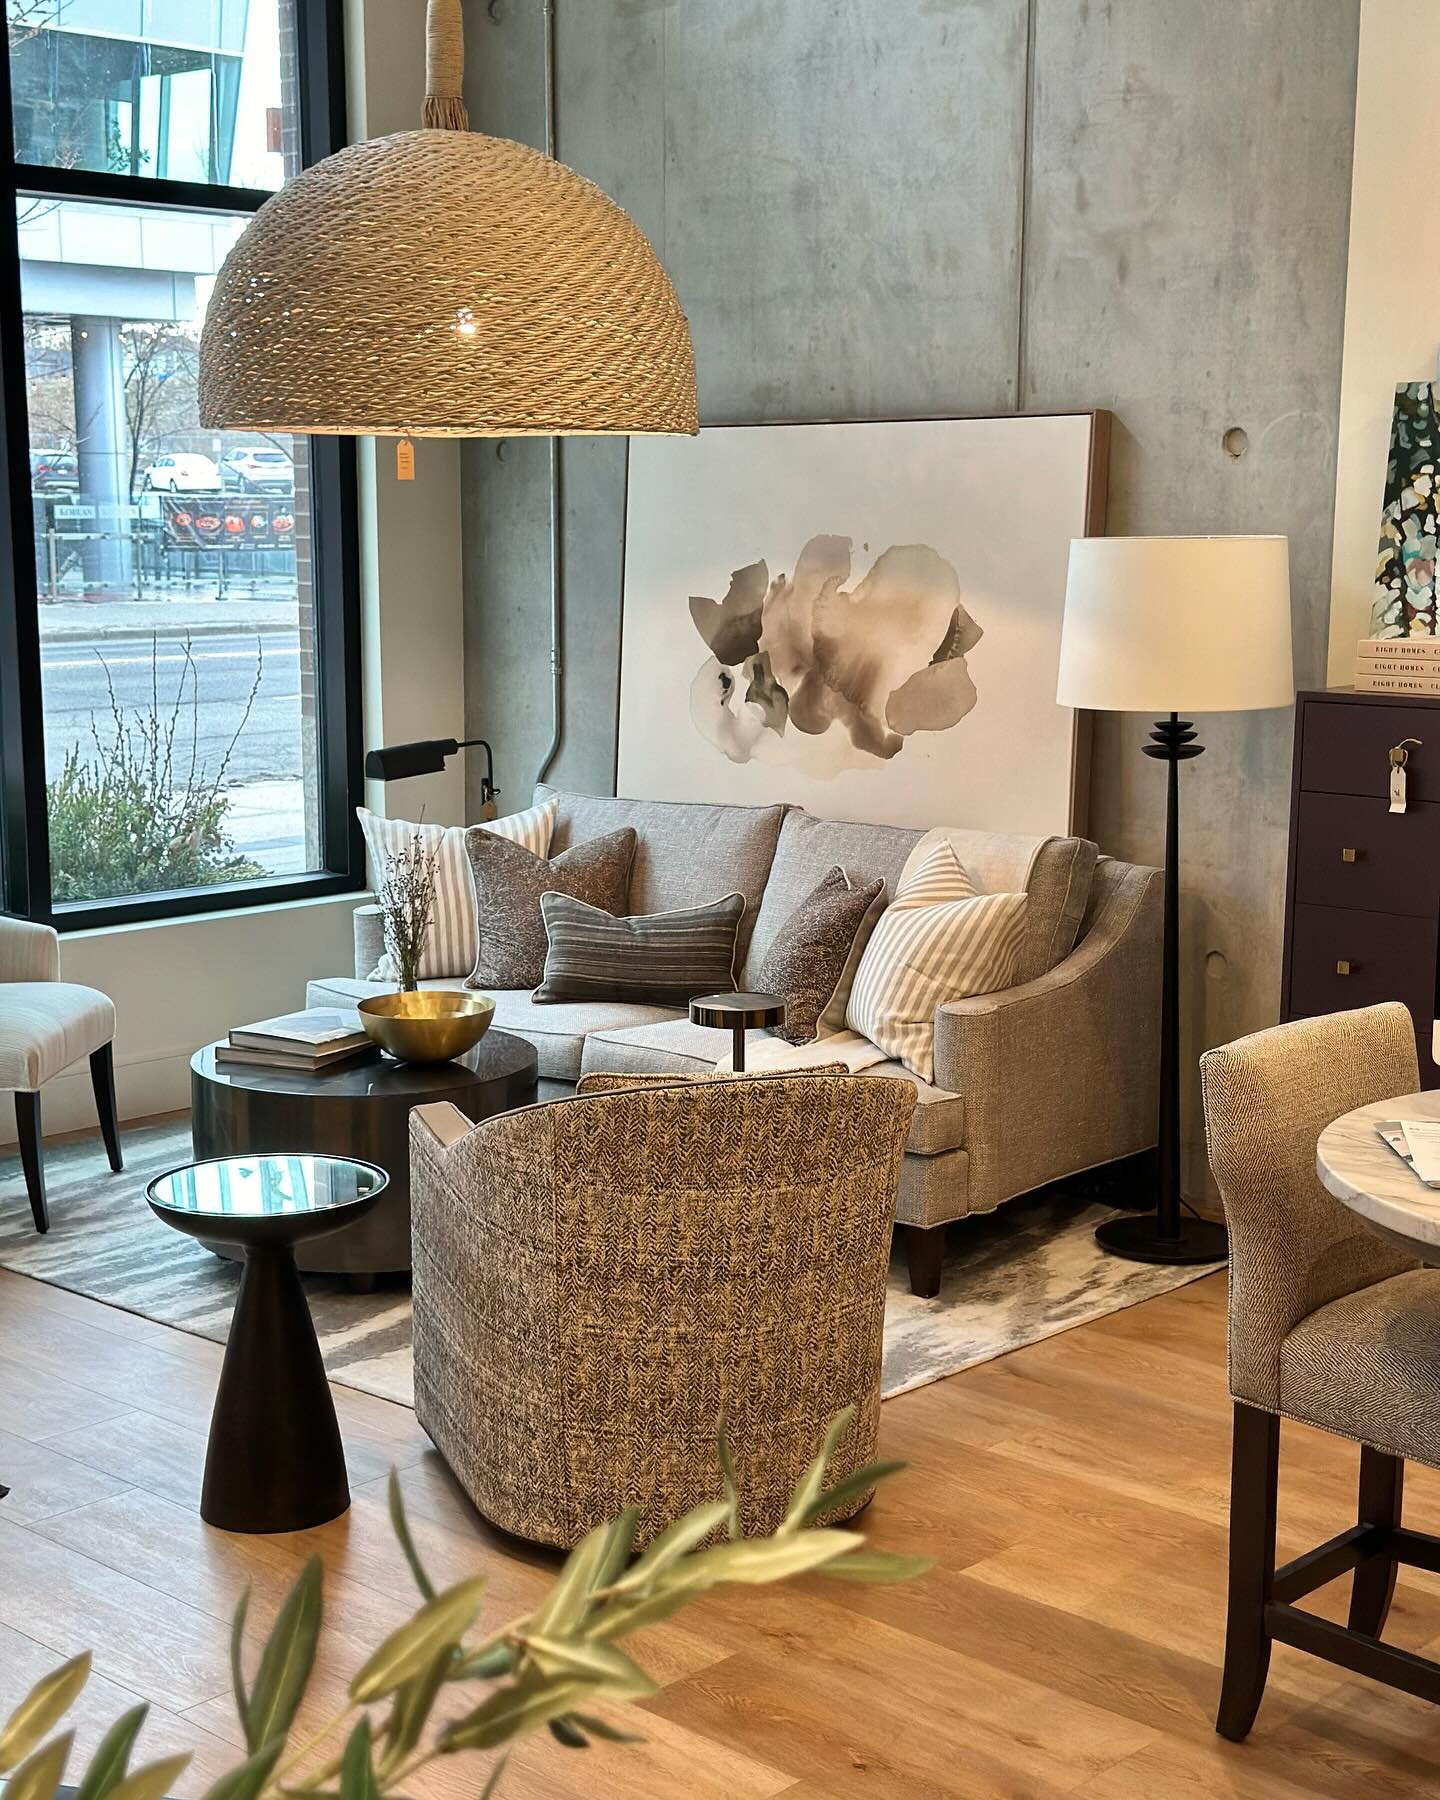 Swooning over our latest delivery of Tannis Marshall originals. 

Mark your calendars for our upcoming @tannismarshallart exhibition on Friday May 10th from 4-7 pm. We&rsquo;ve curated a beautiful new collection of furniture, lighting, rugs and home 